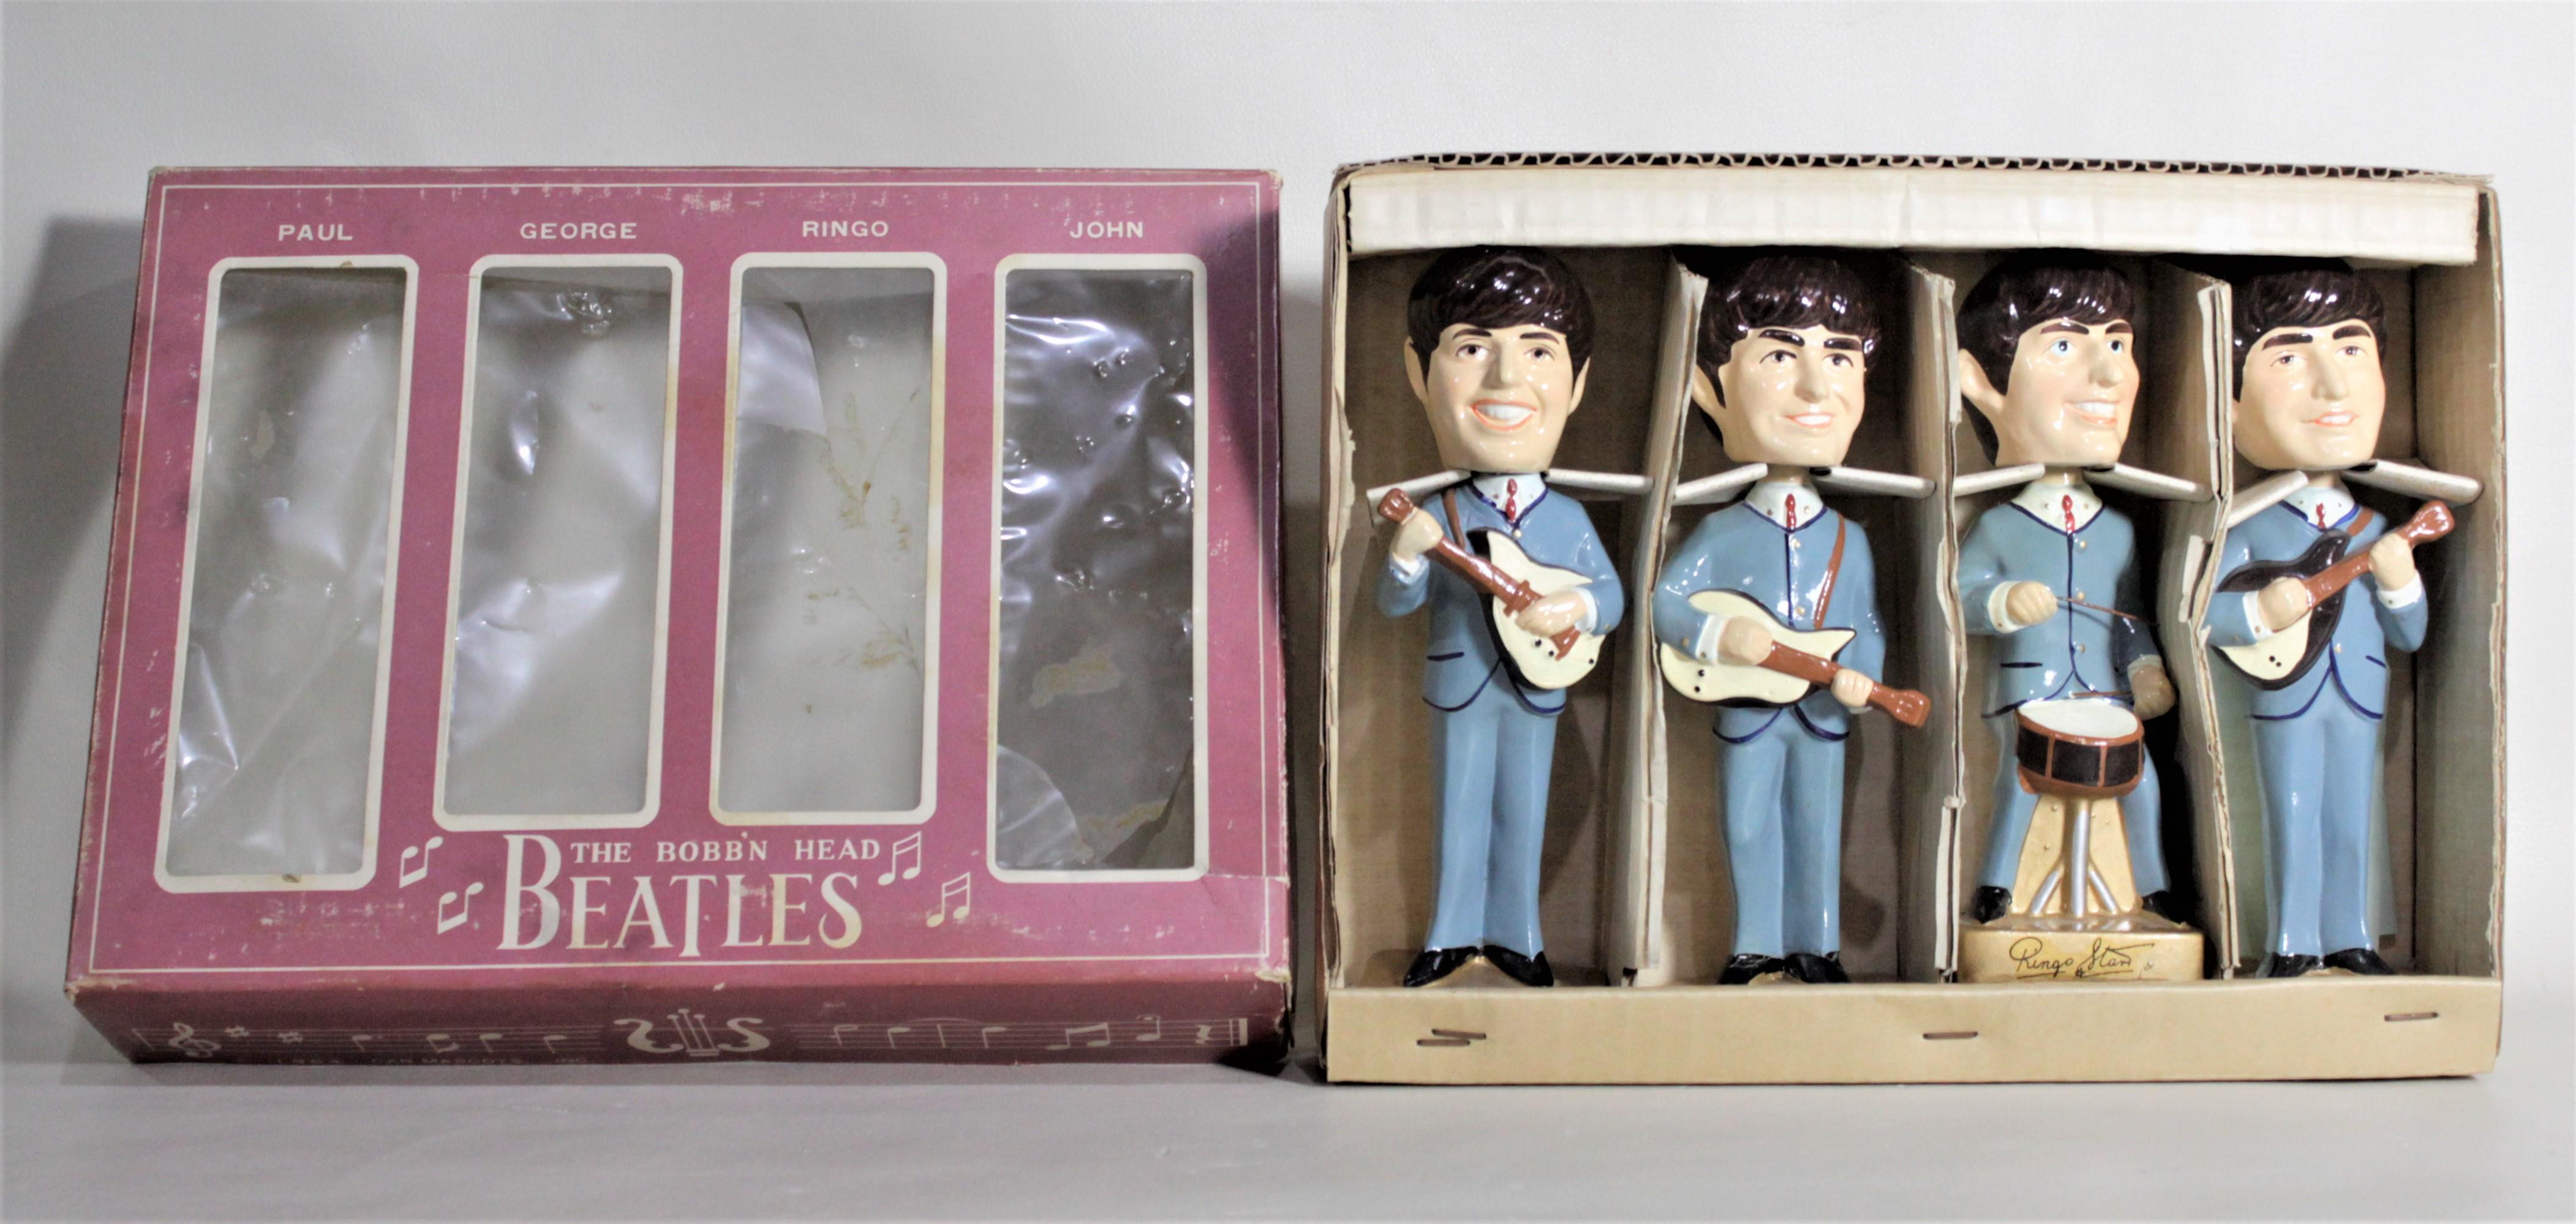 This complete boxed set of Beatles bobbleheads or 